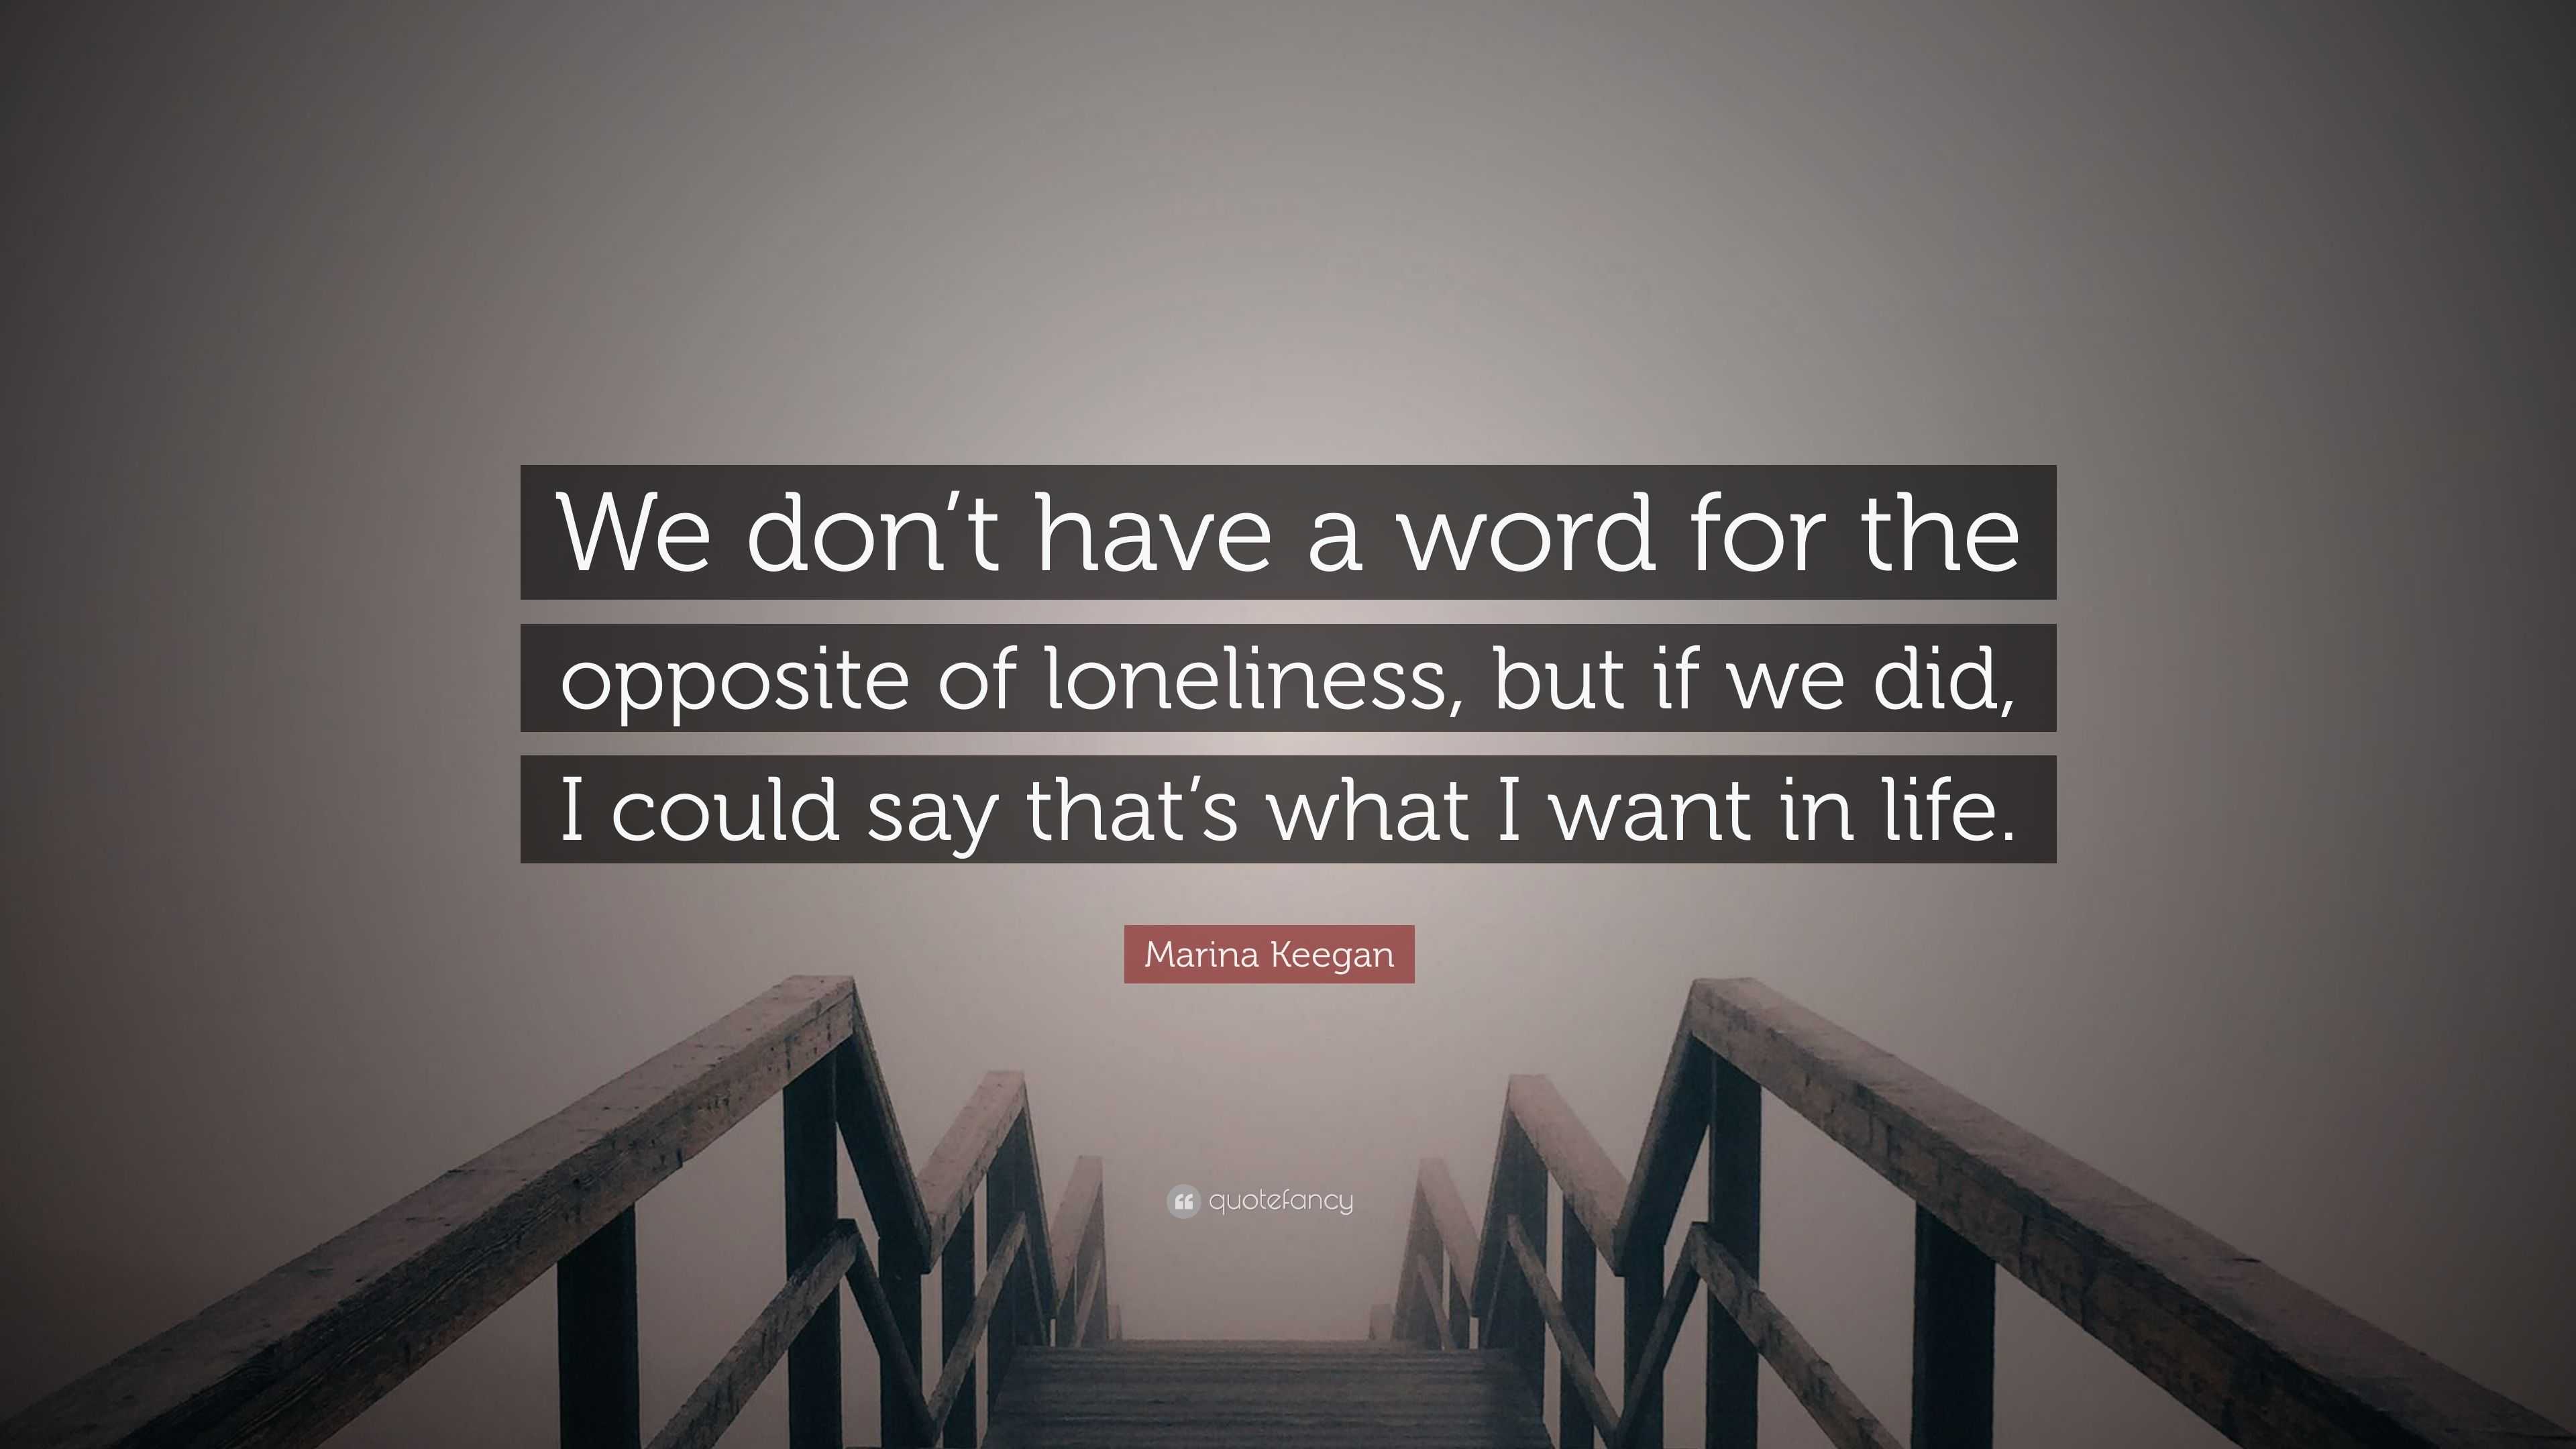 What Is The Word: Opposite Of Loneliness